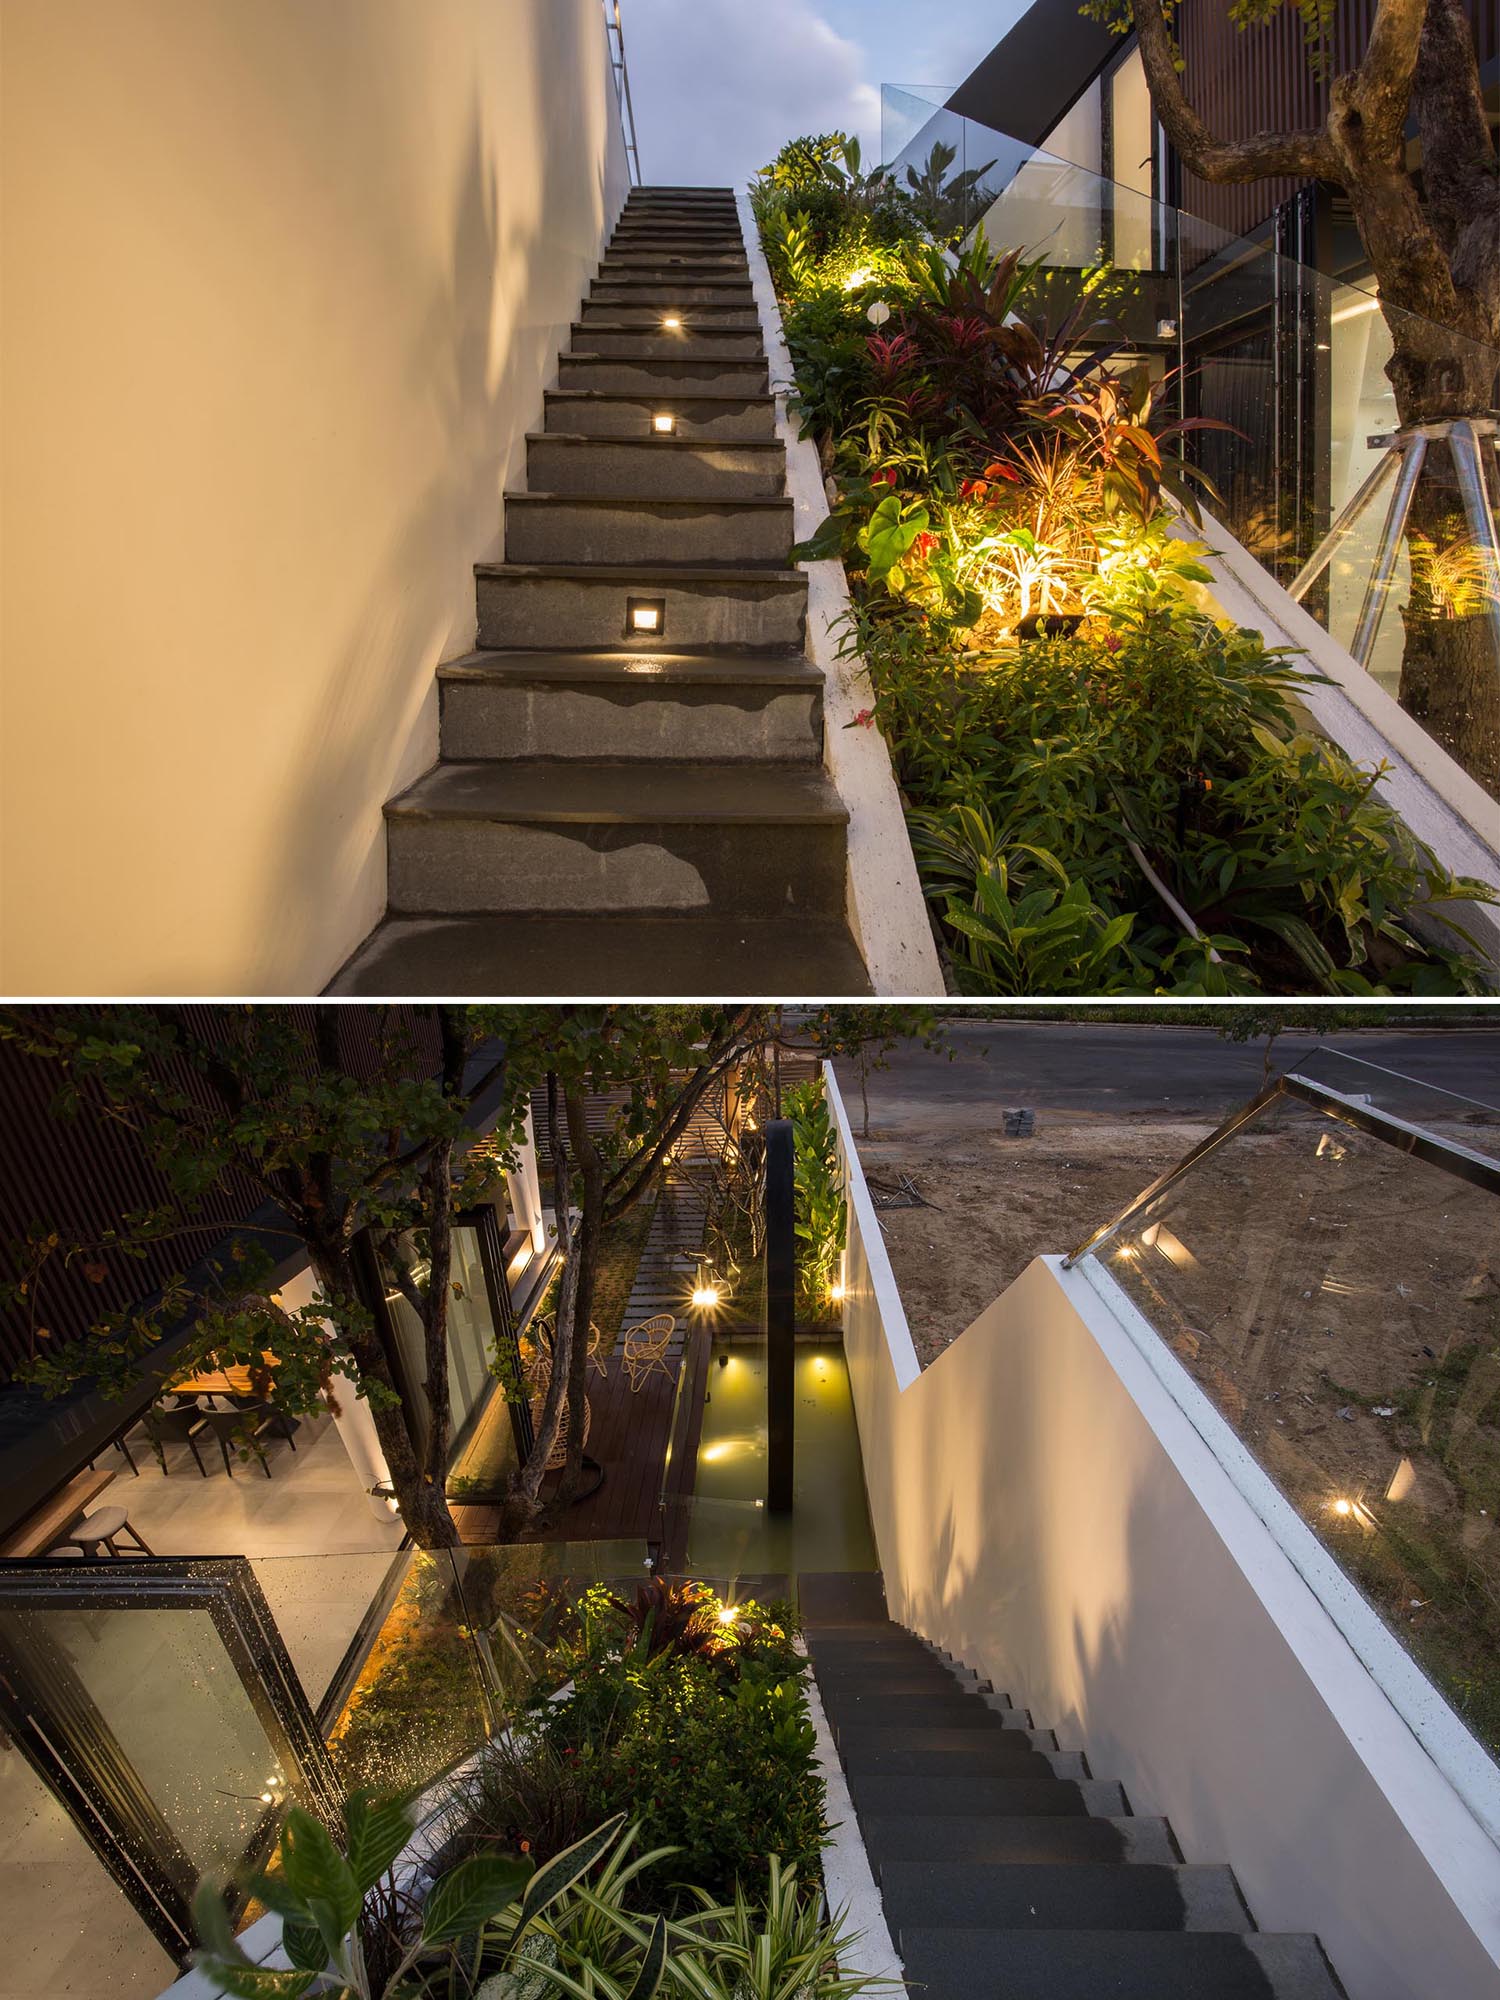 A modern home with exterior stairs that run alongside a heavily planted sloped section and a glass railing.